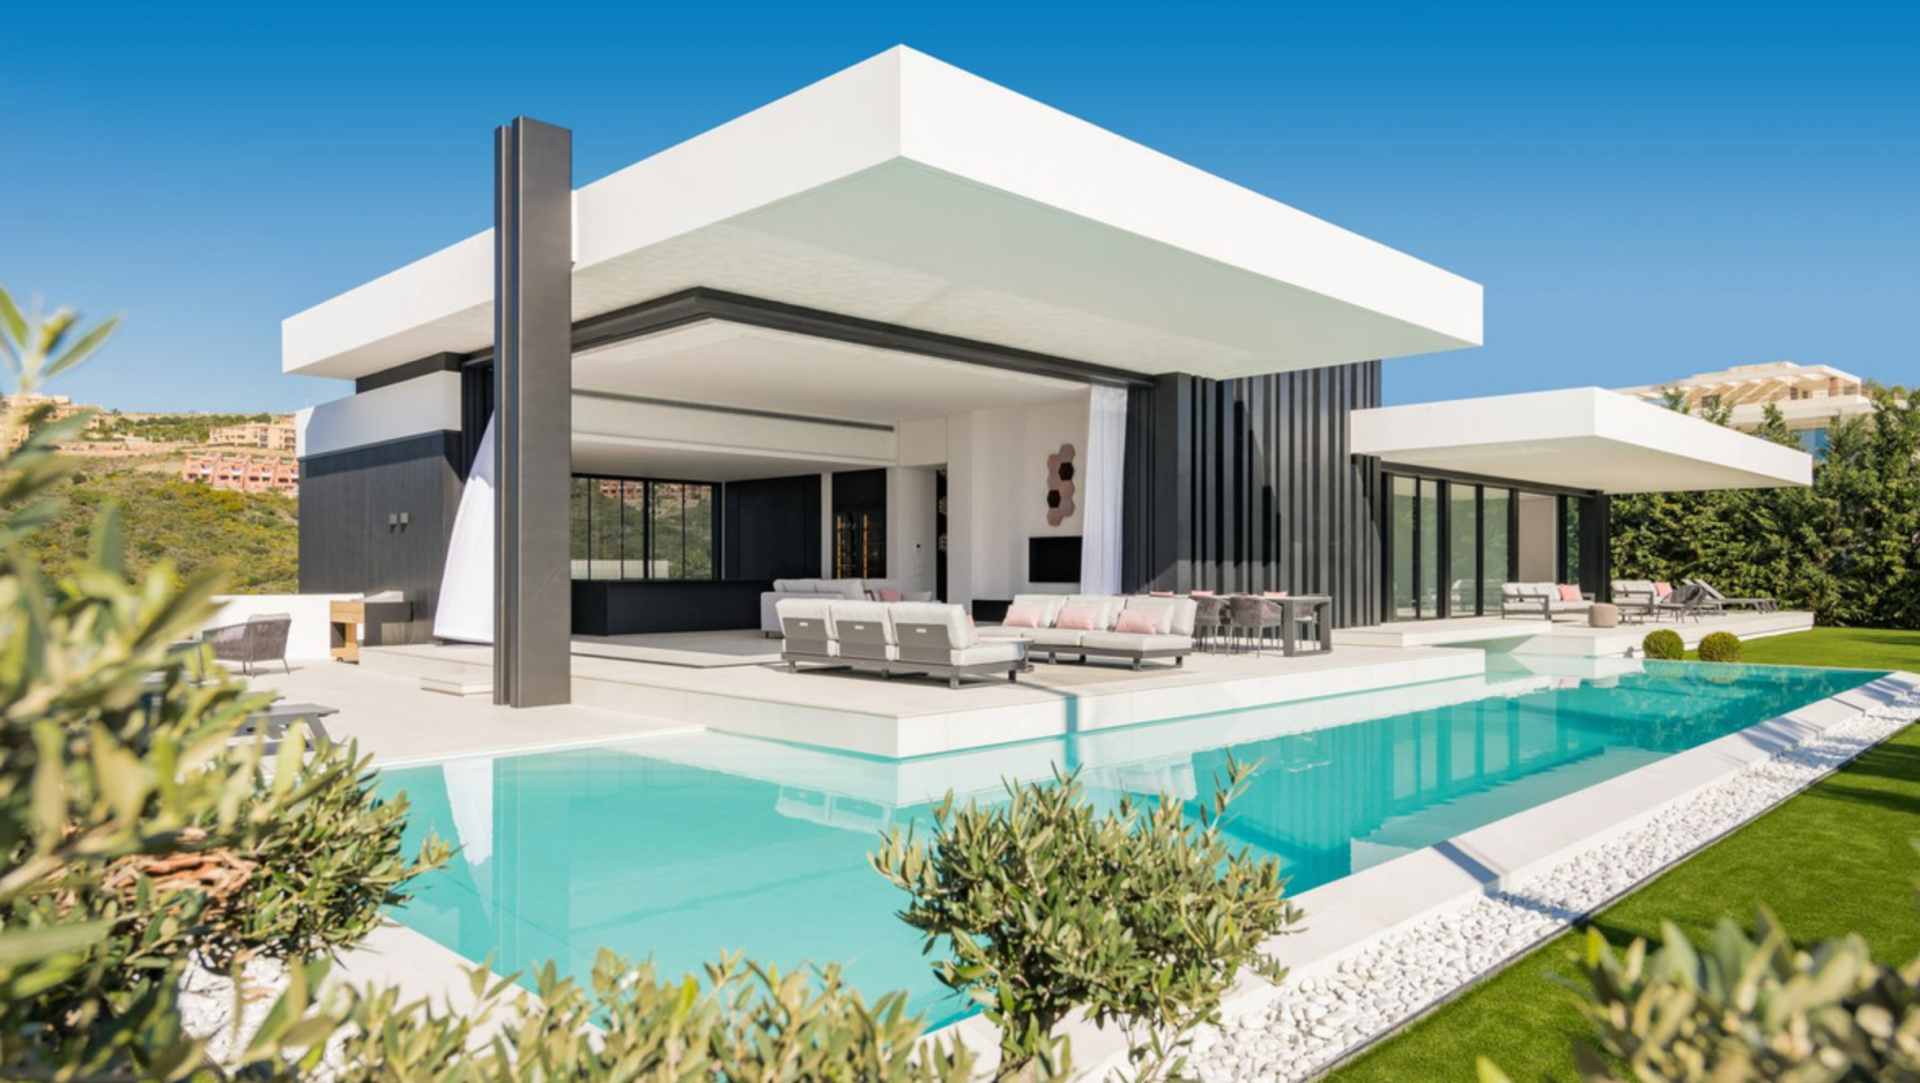 Awe-inspiring frontline golf property with stunning views in La Alqueria